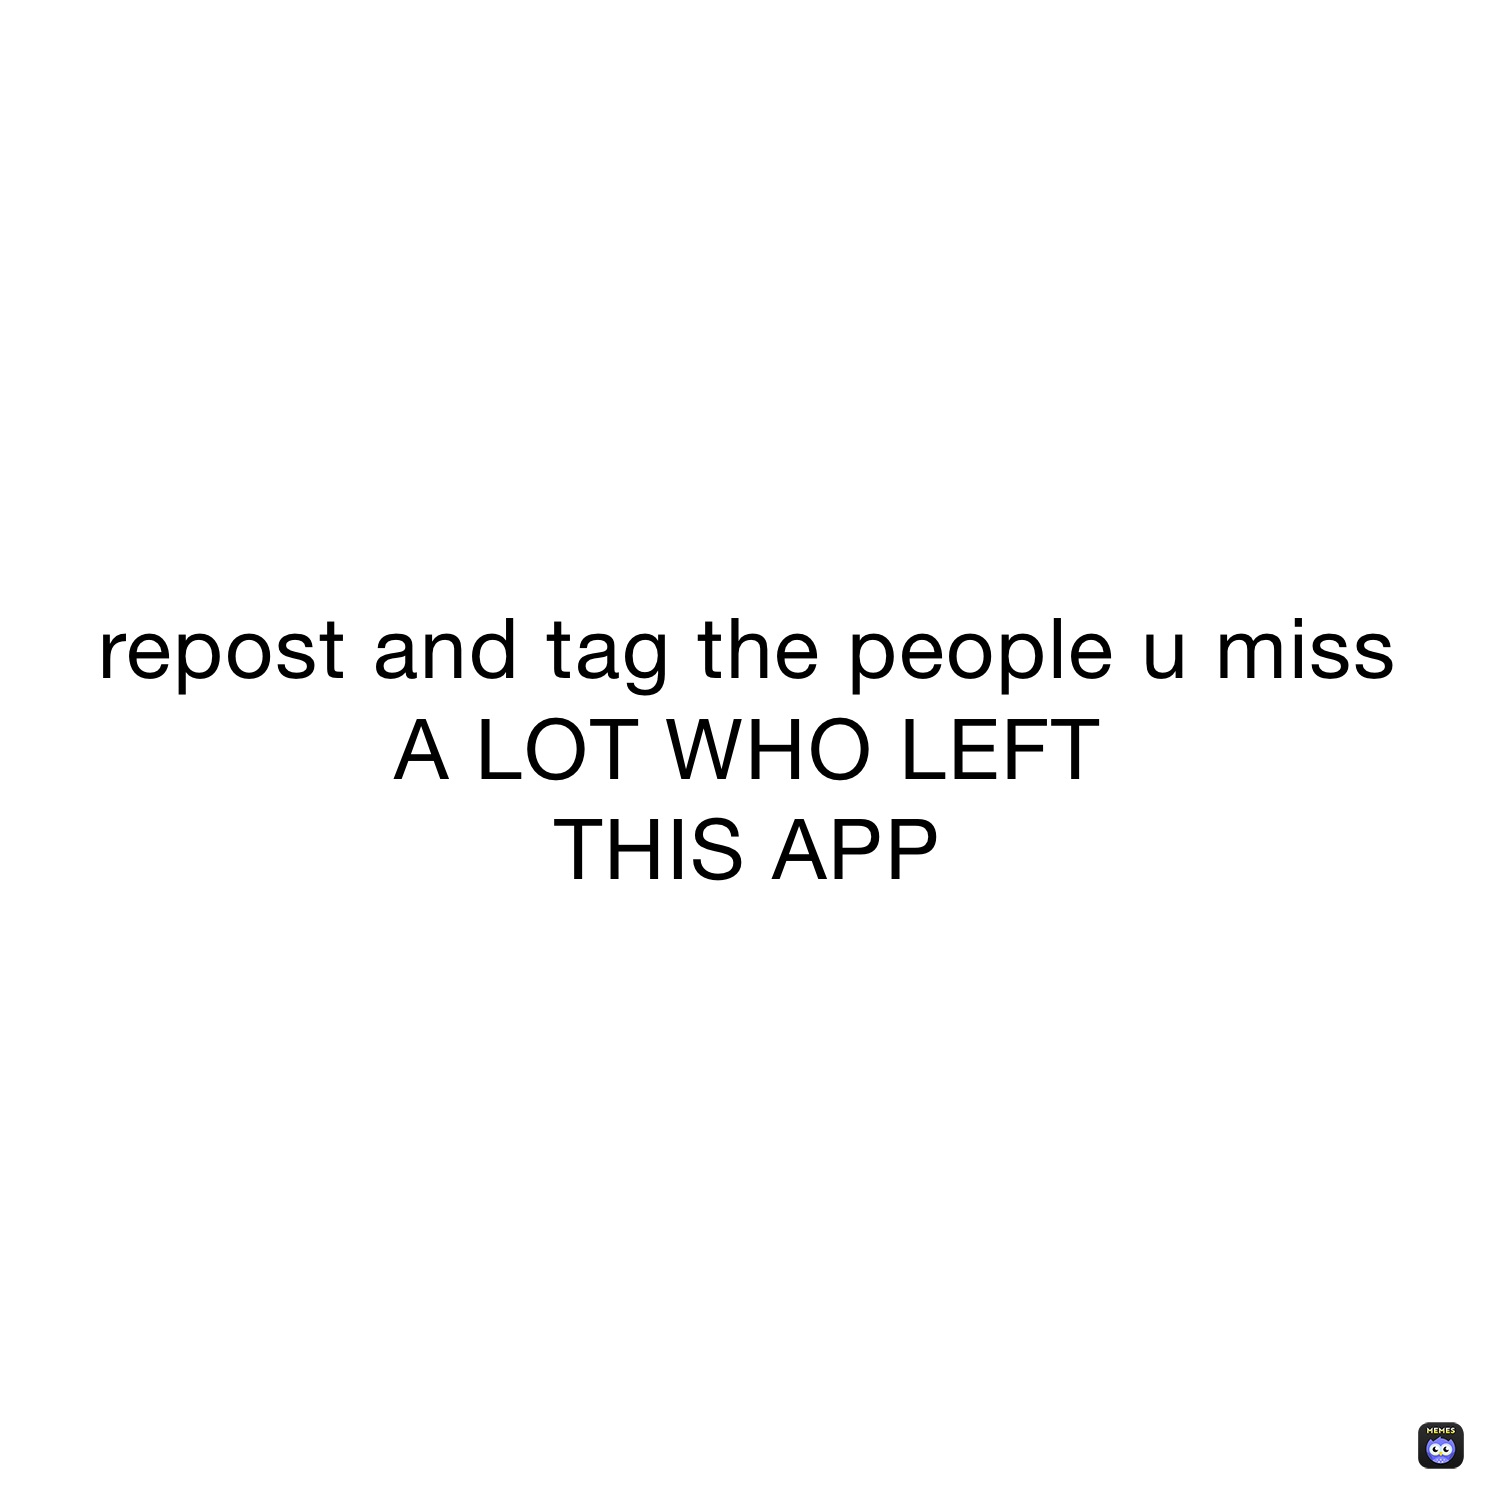 repost and tag the people u miss
A LOT WHO LEFT 
THIS APP